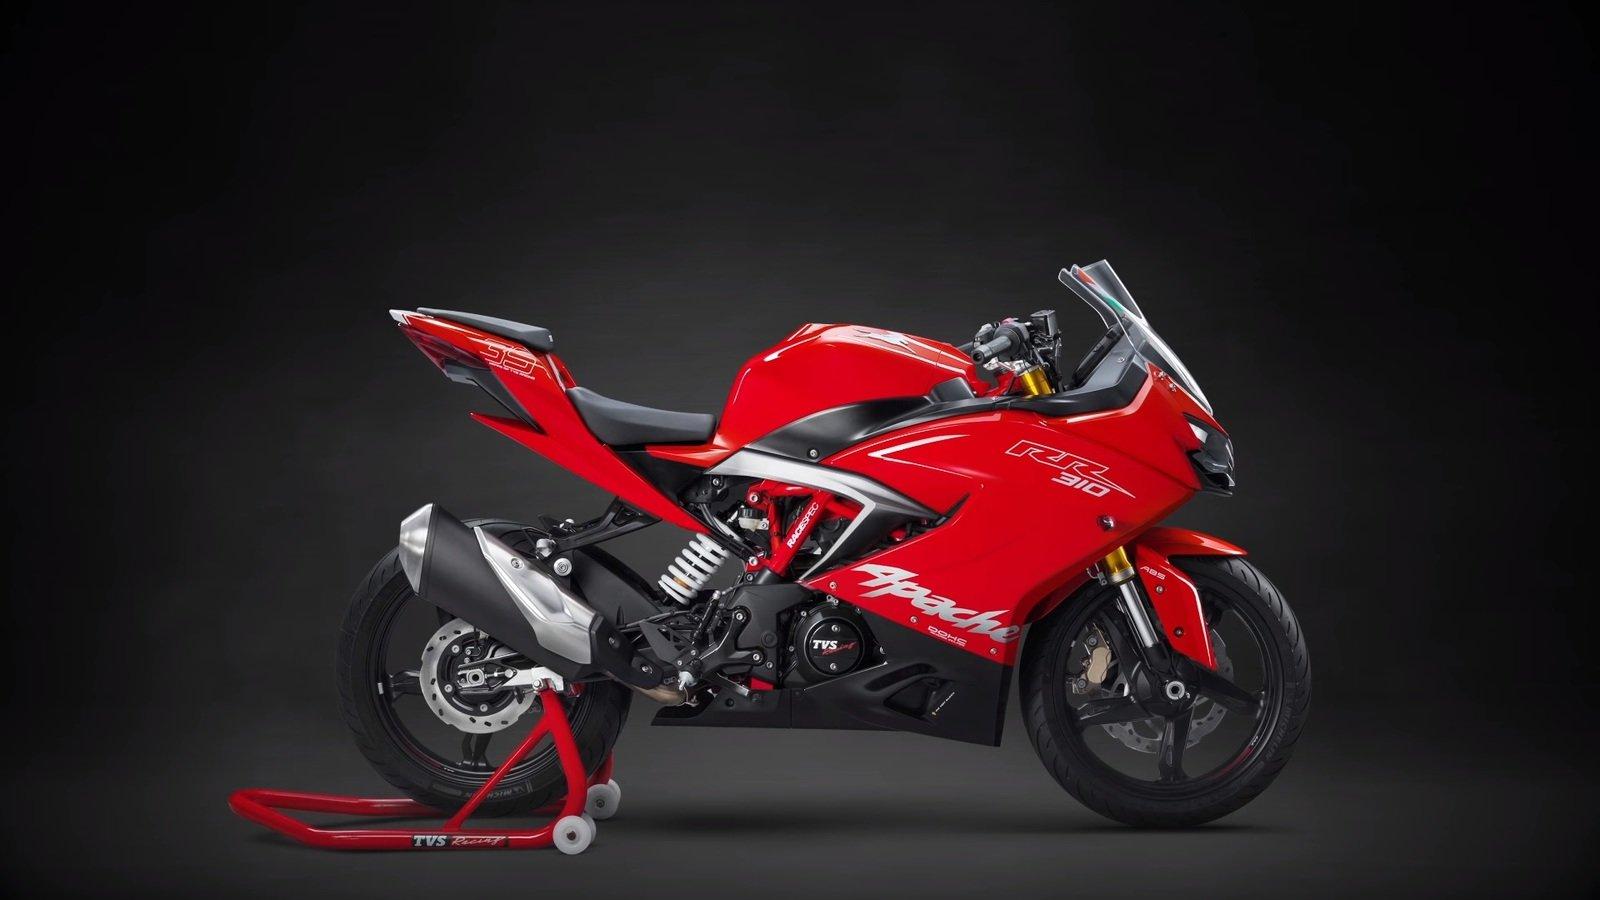 TVS Apache RR 310 Picture, Photo, Wallpaper And Videos